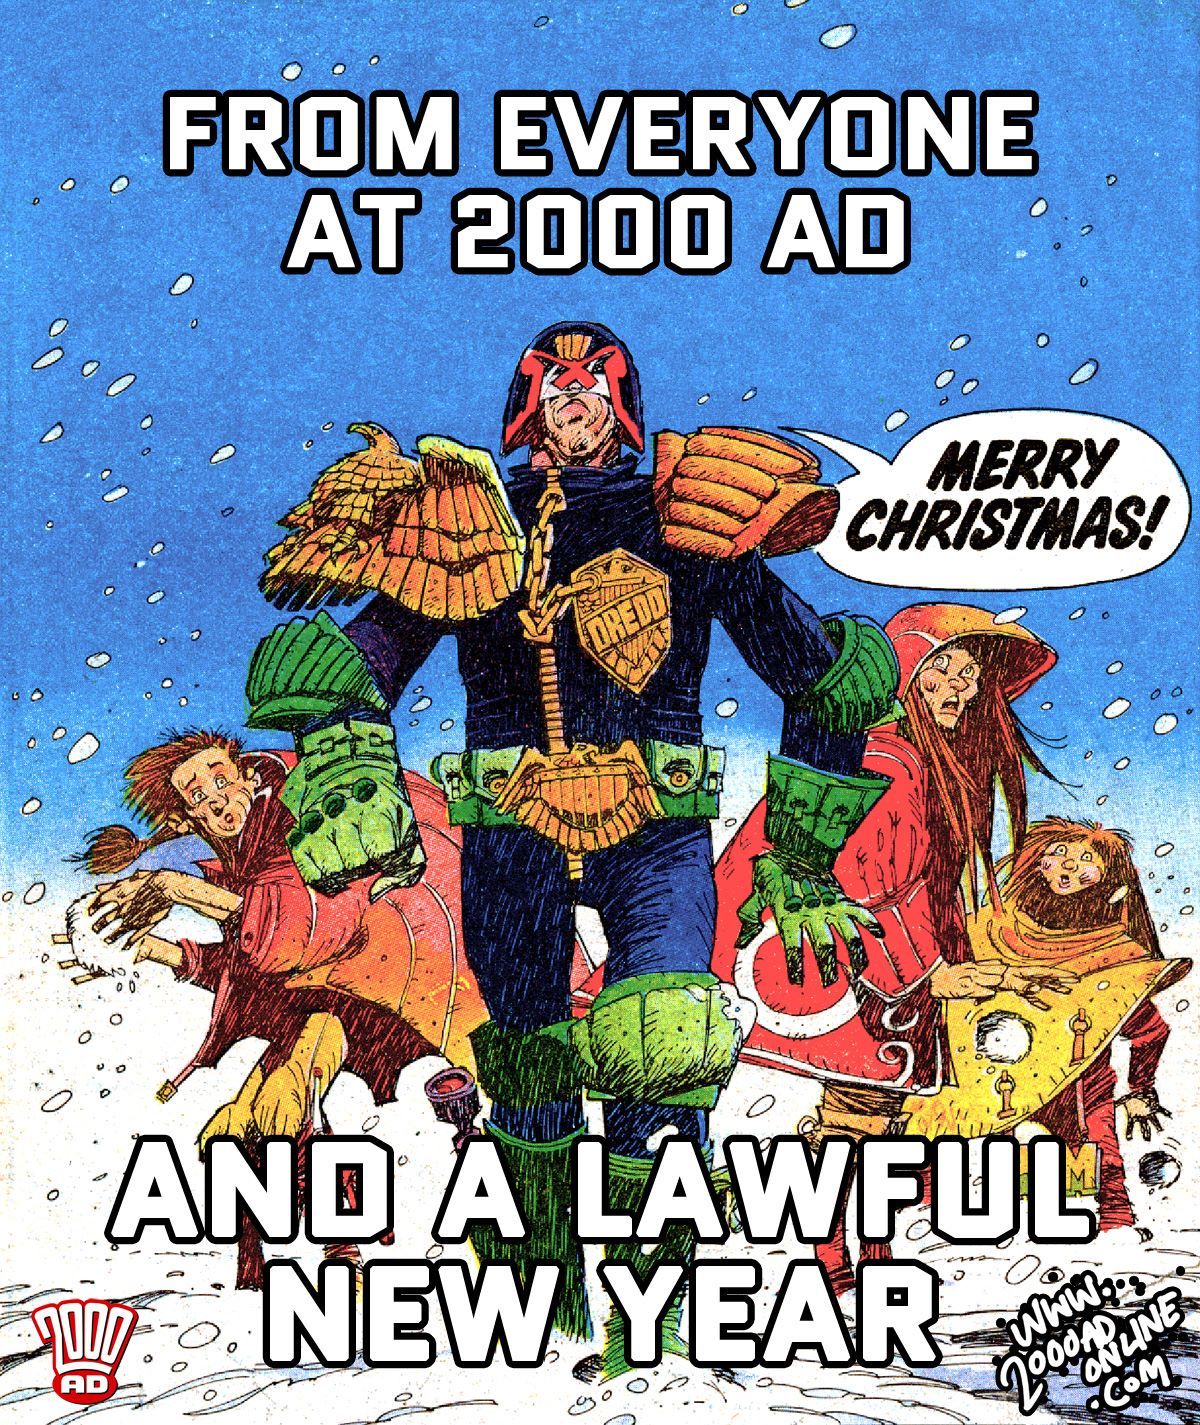 naavscolors:  futureshocked294: 2000adonline: From everyone at 2000 AD to all our